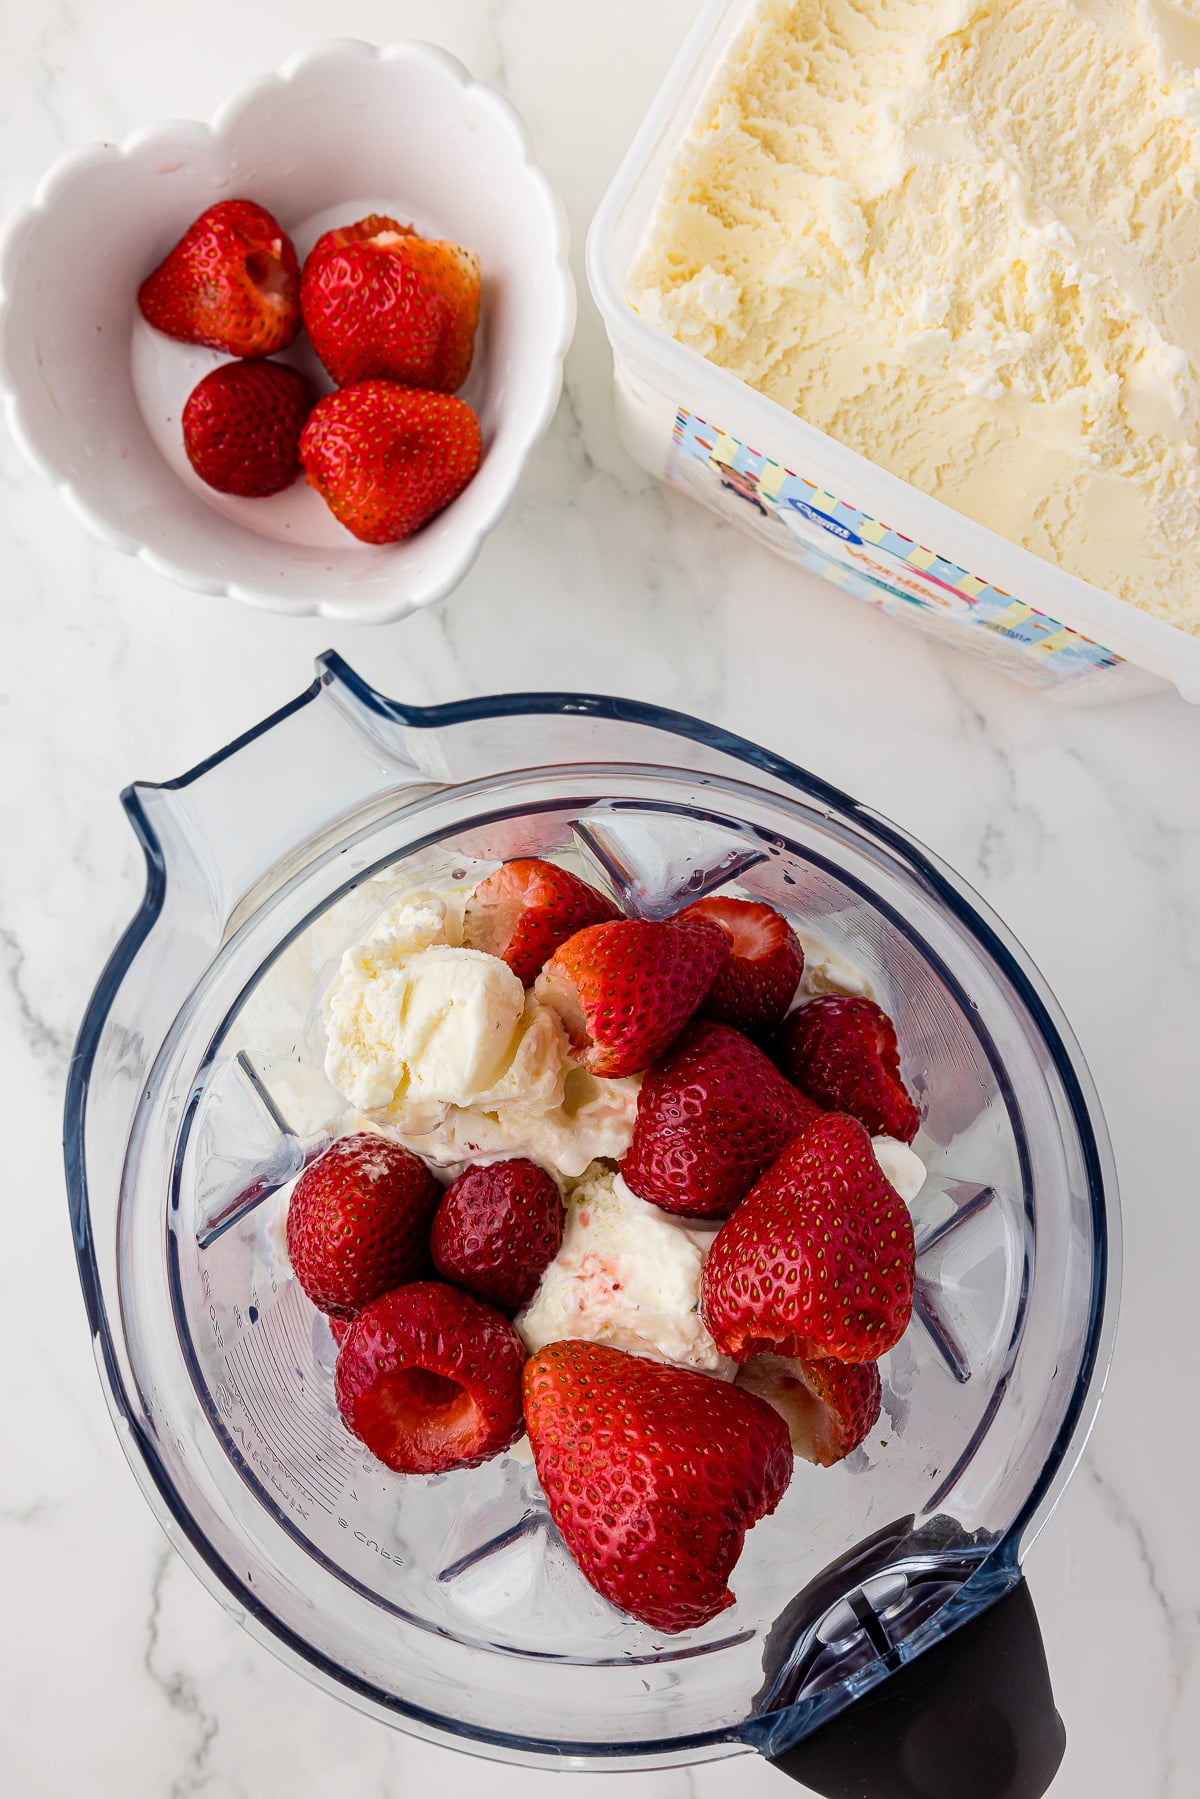 inside of a blender filled with vanilla ice cream and fresh strawberries, a bowl of strawberries and a carton of vanilla ice cream in the background on a white marble countertop.